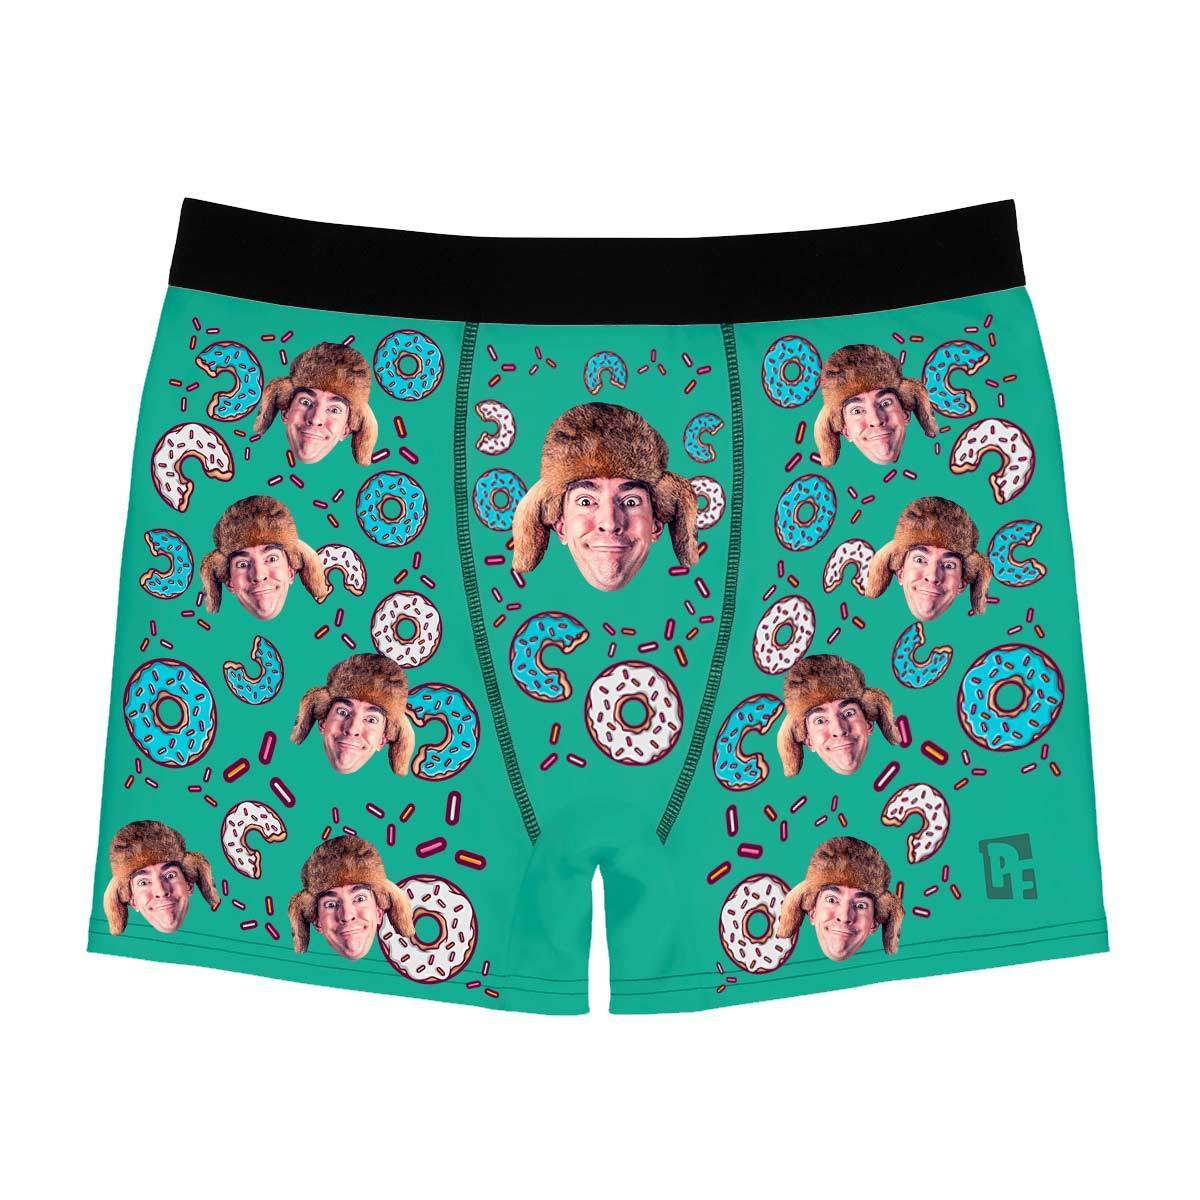 Mint Donuts men's boxer briefs personalized with photo printed on them